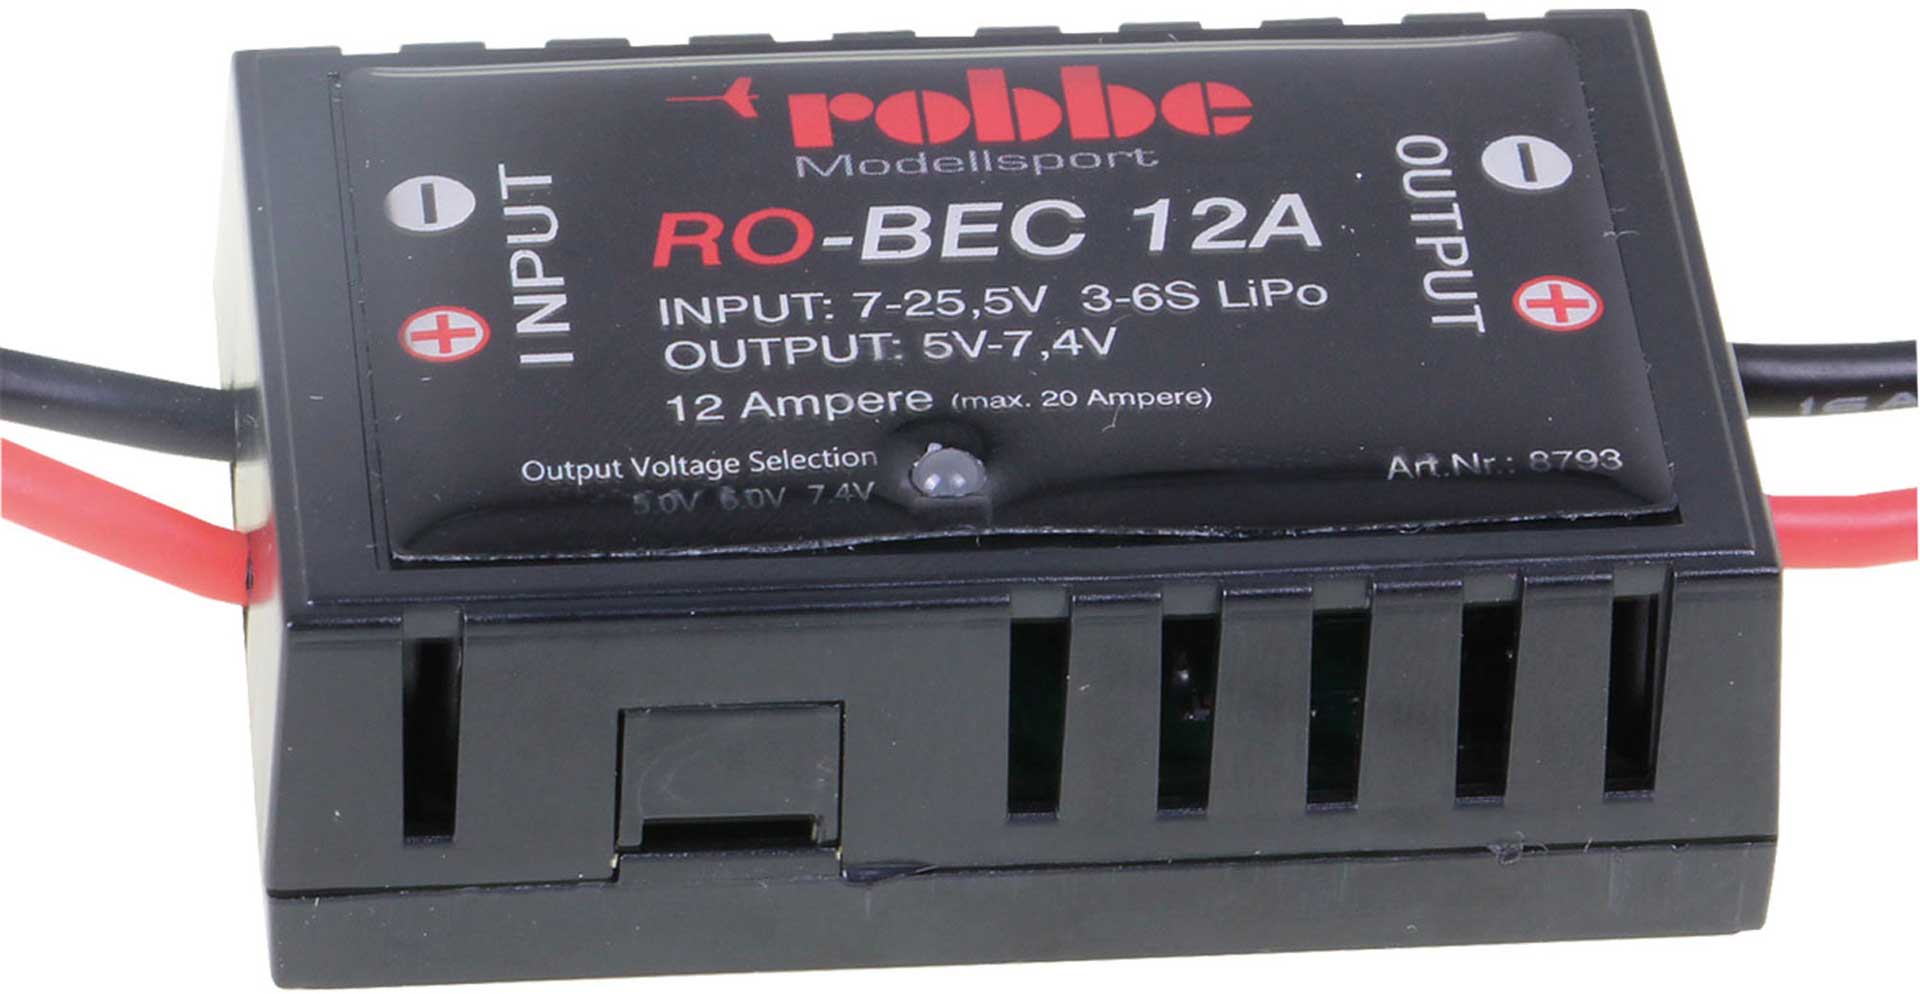 Robbe Modellsport RO-BEC 12A RECEIVER POWER SUPPLY